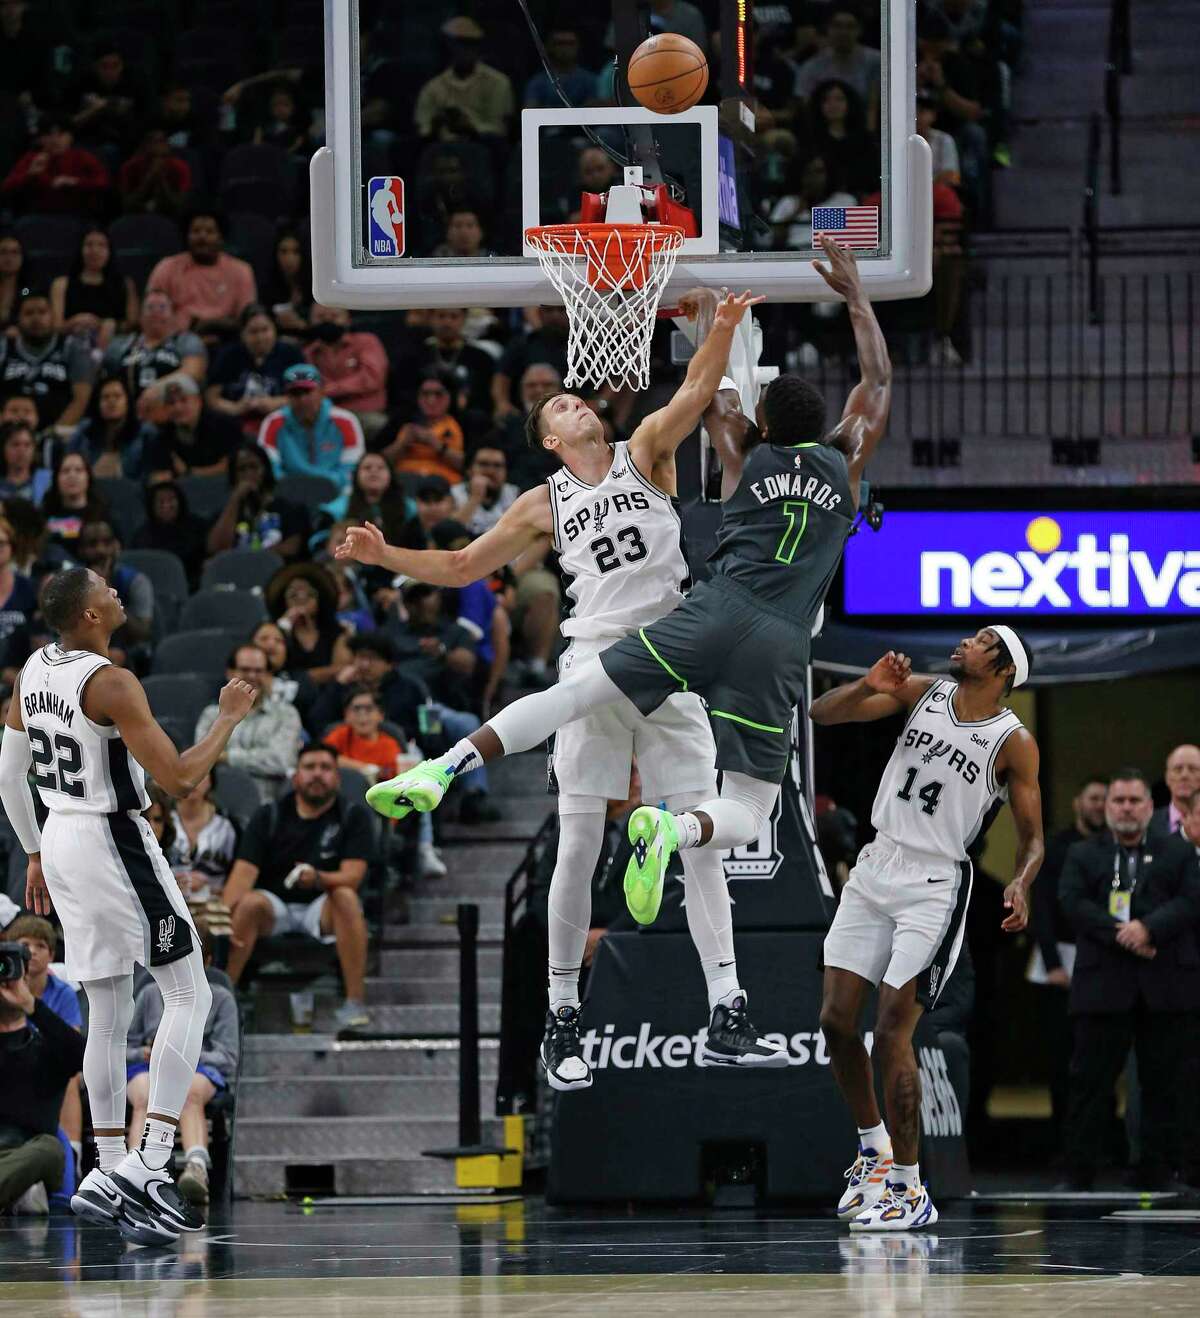 The Spurs’ Zach Collins blocks a shot by the Timberwolves’ Anthony Edwards in the first half Sunday at the AT&T Center.